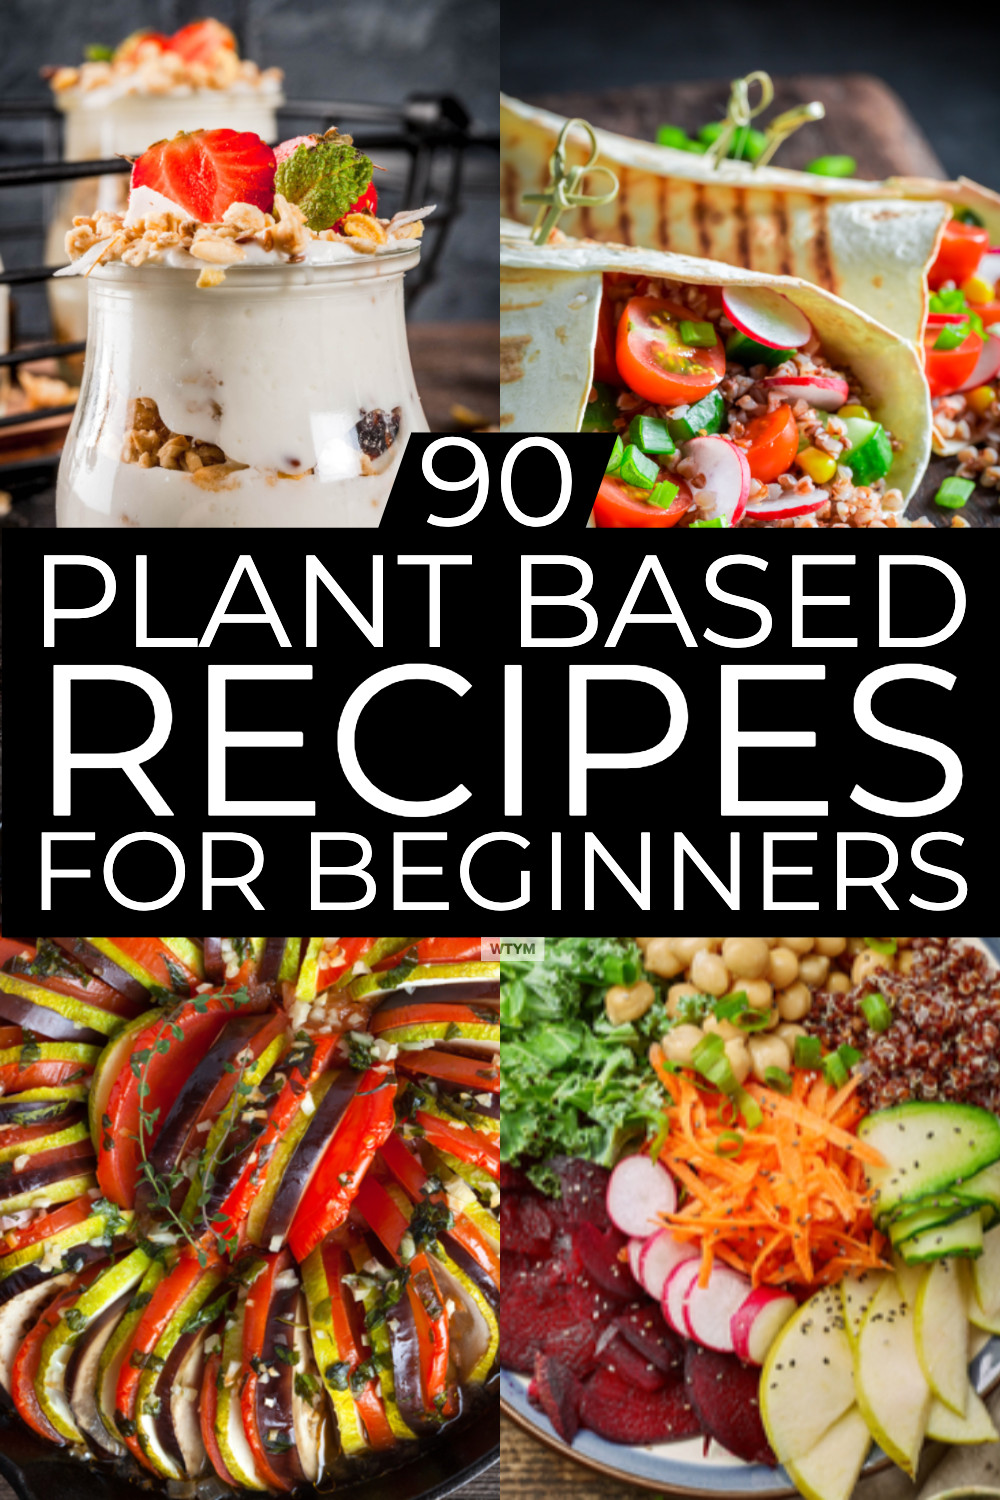 15 Cool Plant Based Diet for Beginners to Lose Weight Meal Plan - Best 